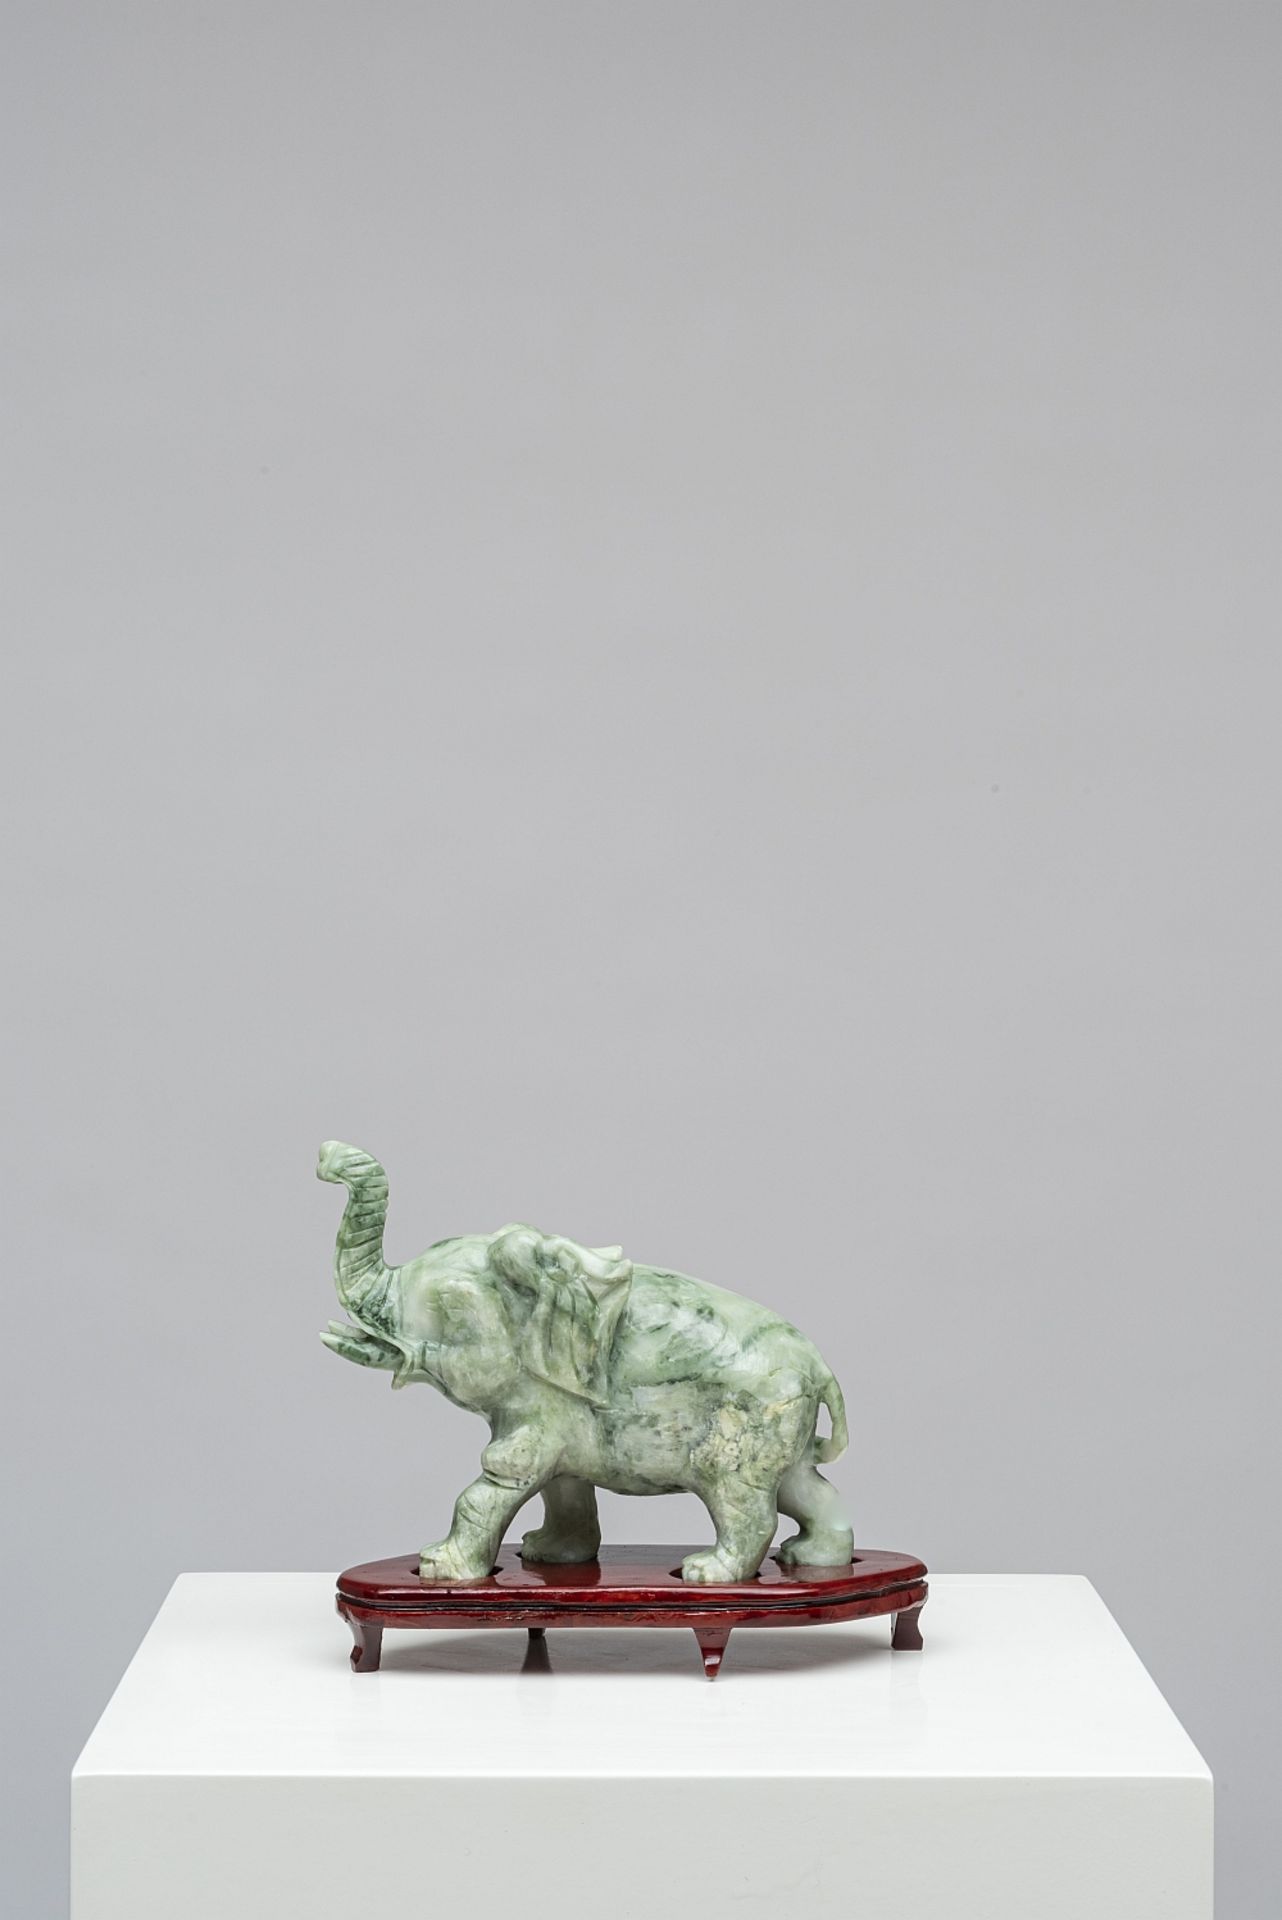 SMALL ELEPHANT ON STAND - Image 4 of 6